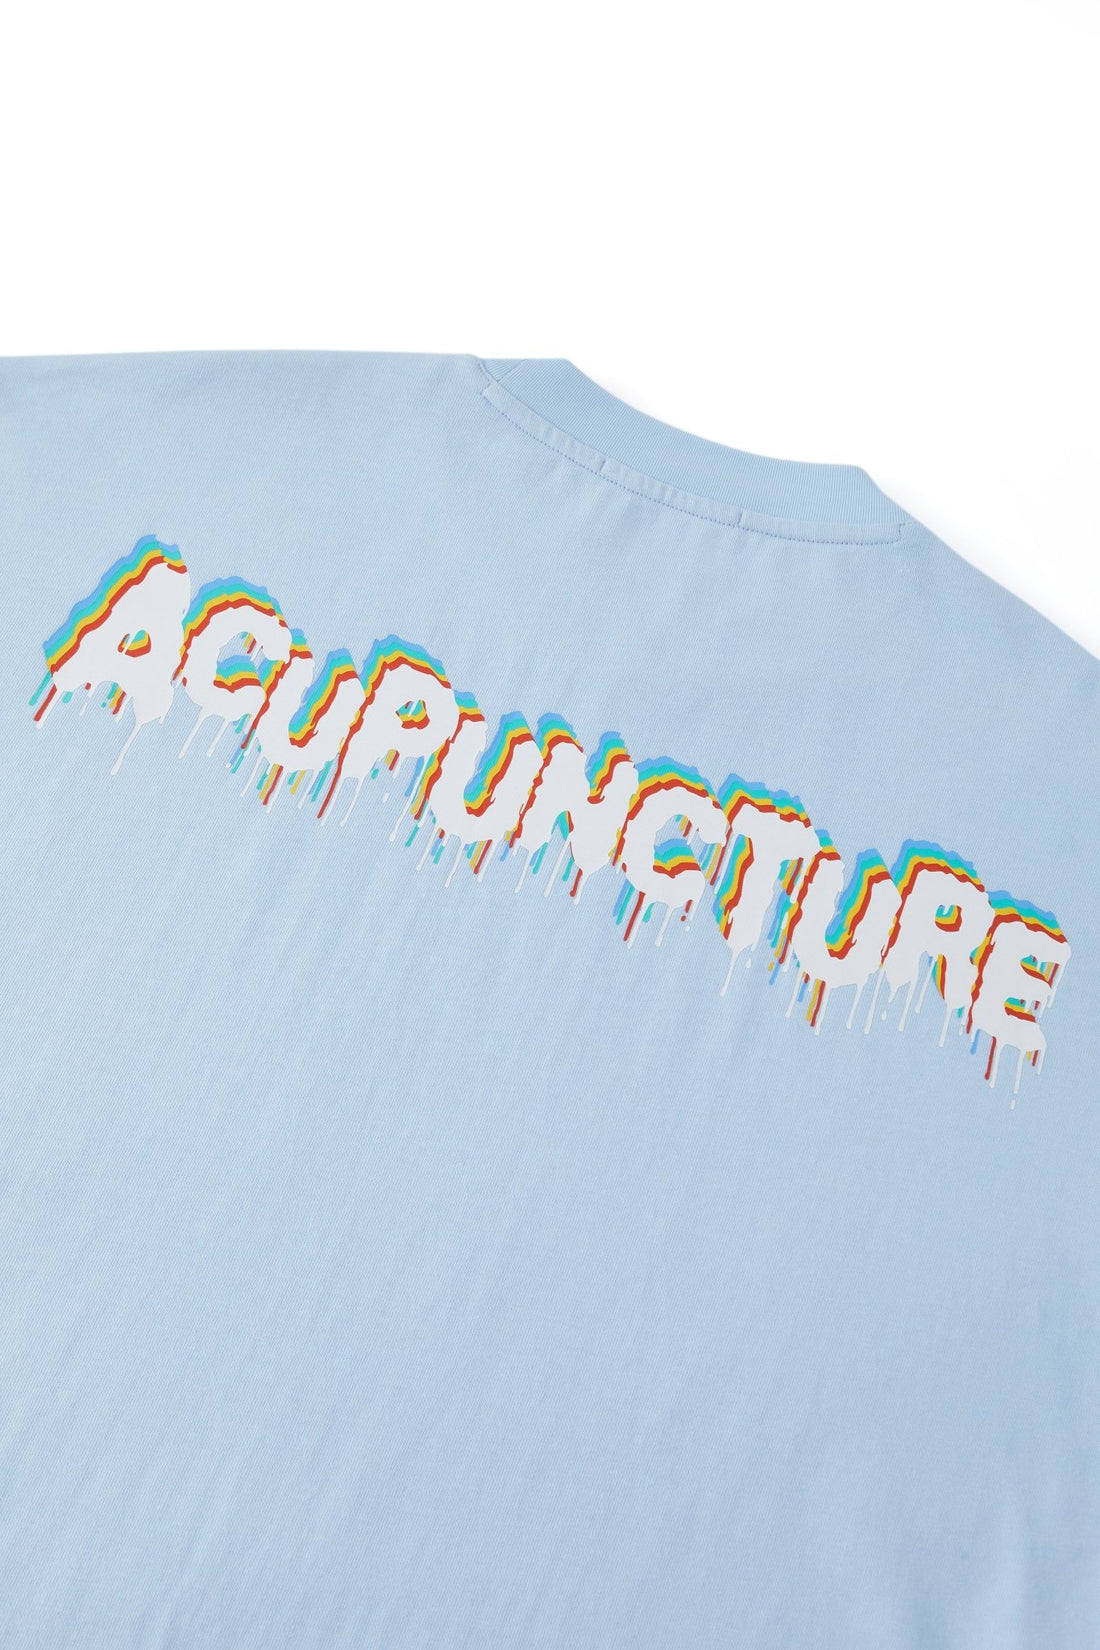 INVERTED EMBLEM TSHIRT BABY BLUE Acupuncture